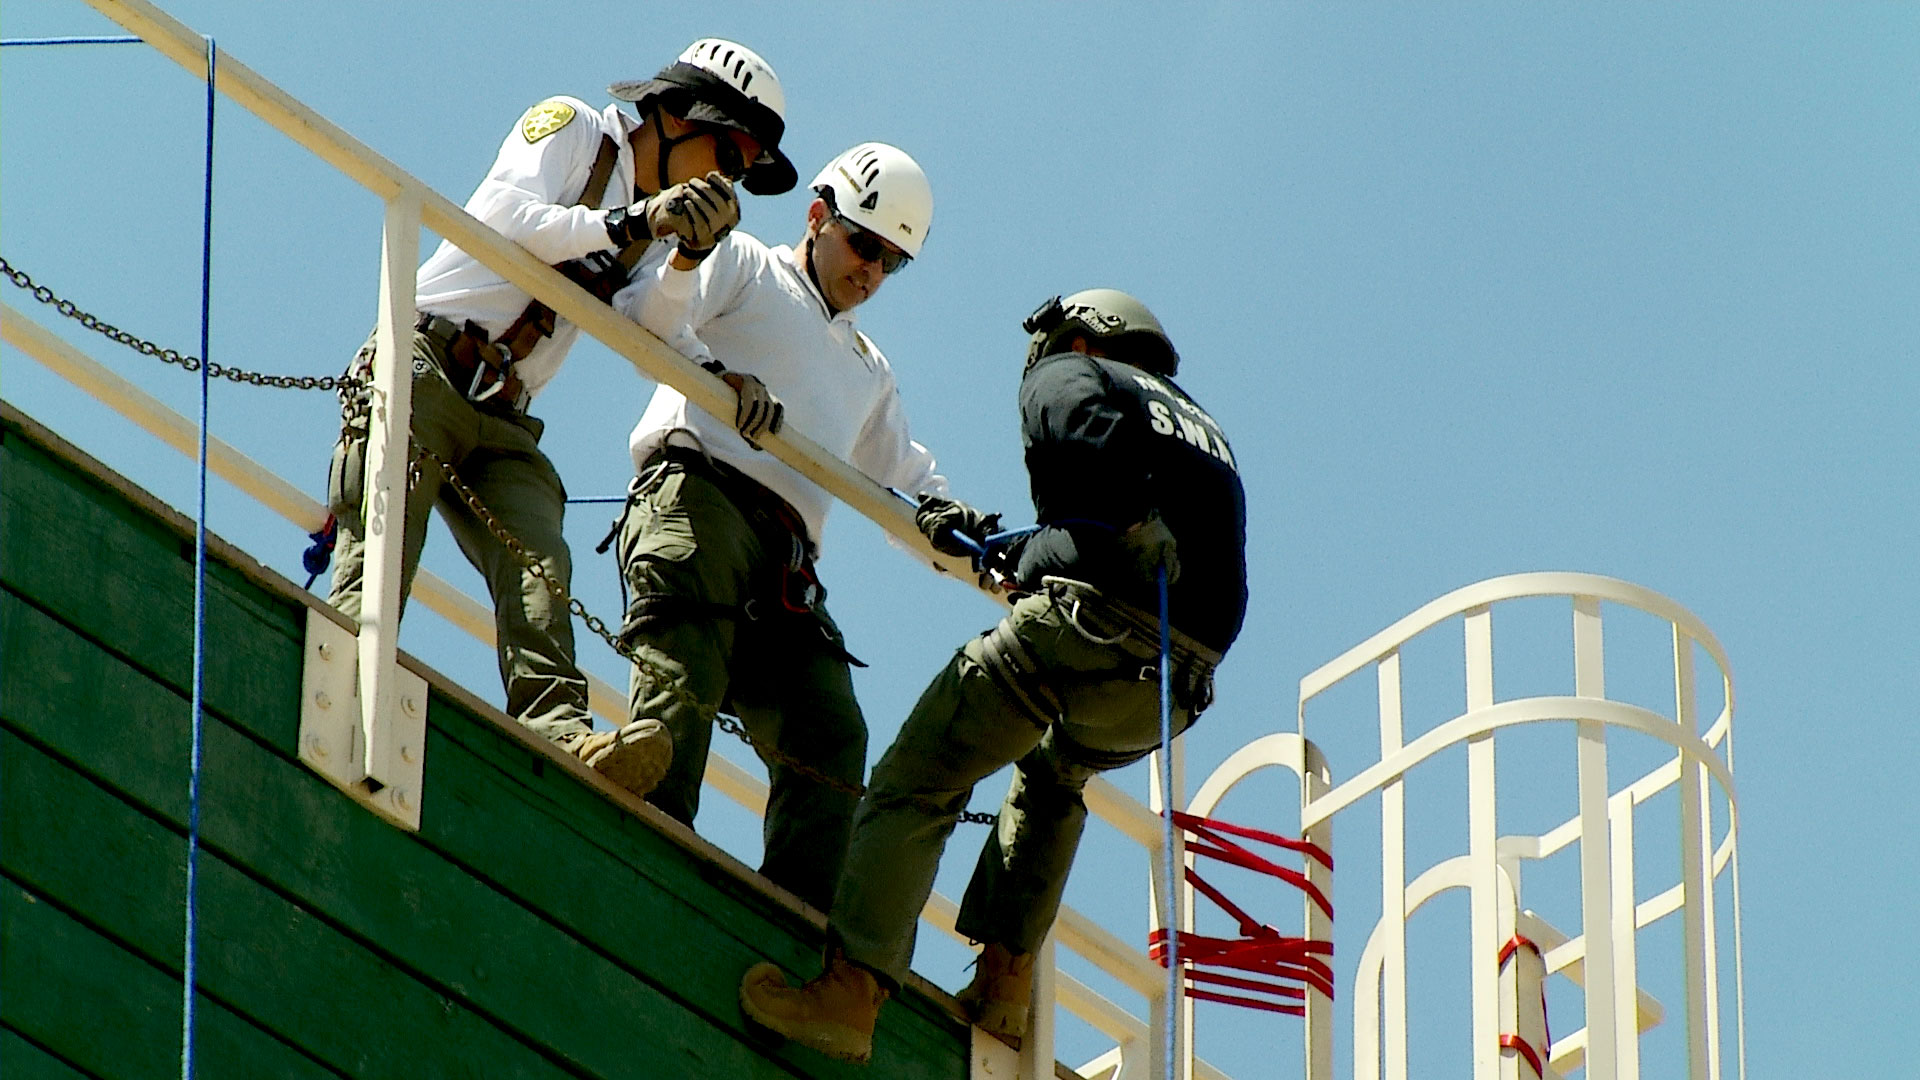 Members of Pima County Sheriff's Department Search and Rescue Unit help a member of the department's SWAT team repel down a wall in a training exercise at the Pima Regional Training Center on June 26, 2019.  